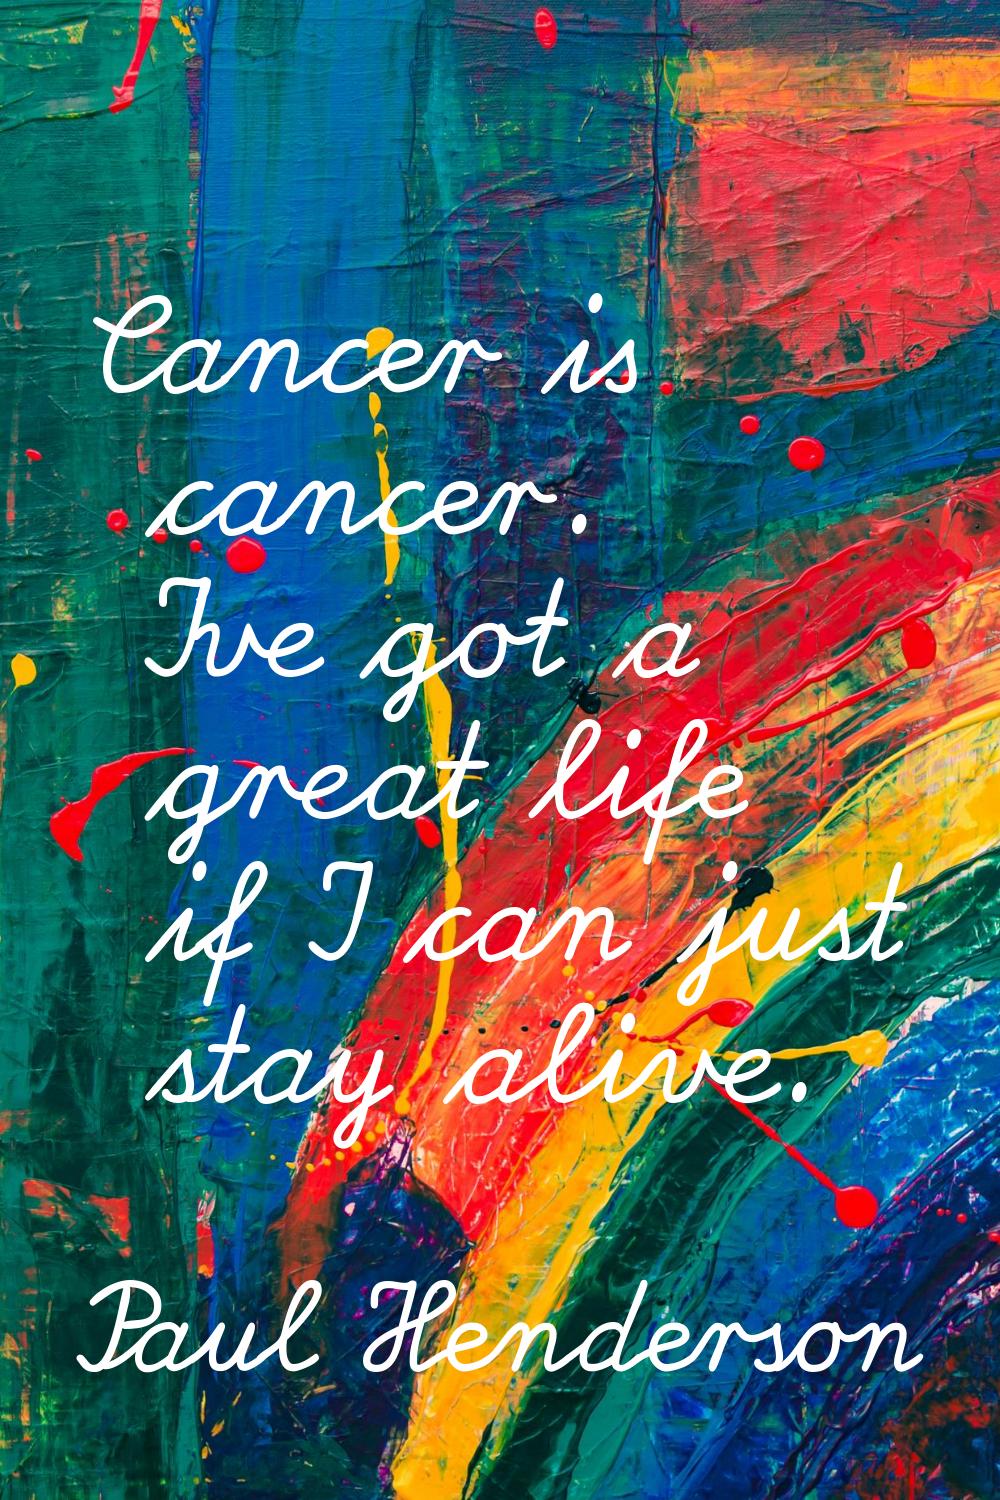 Cancer is cancer. I've got a great life if I can just stay alive.